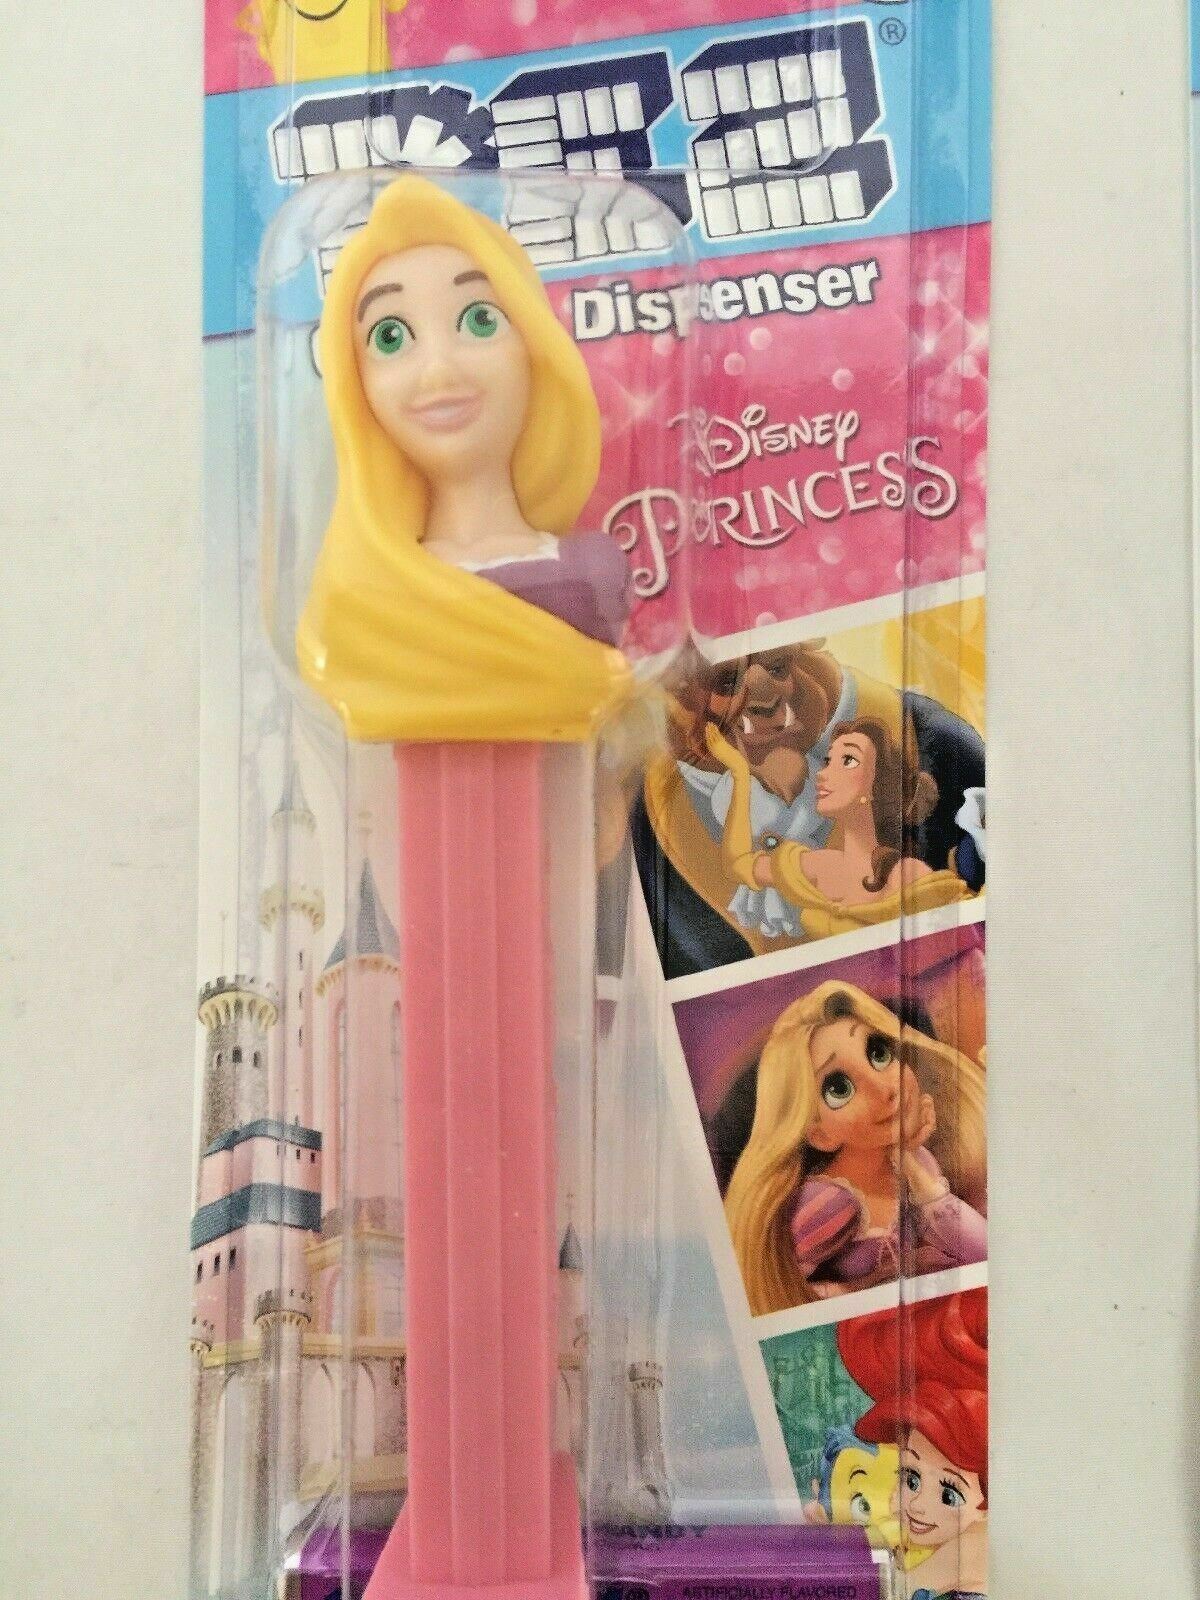 Set of 5 Pez Disney Princess Candy Dispensers w/ Candy, Sealed Great party favor Без бренда - фотография #4